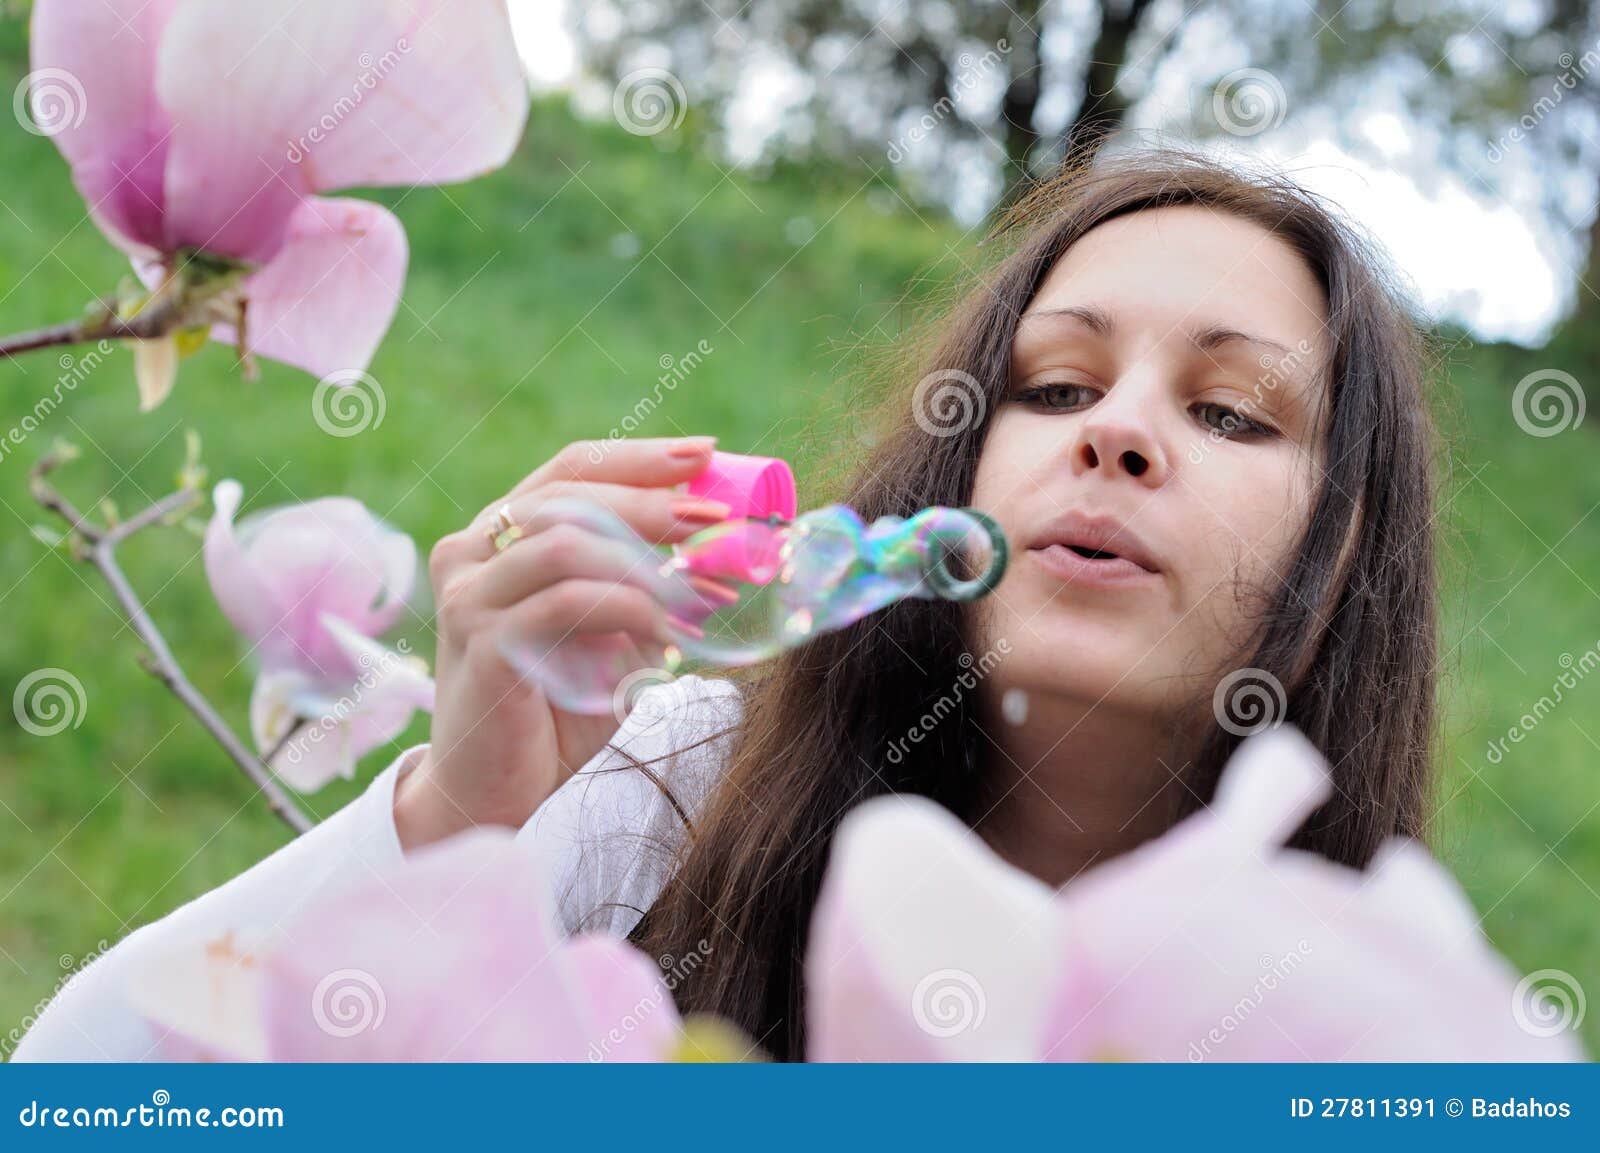 Girl Blow Bubbles Stock Image Image Of People Cheerful 27811391